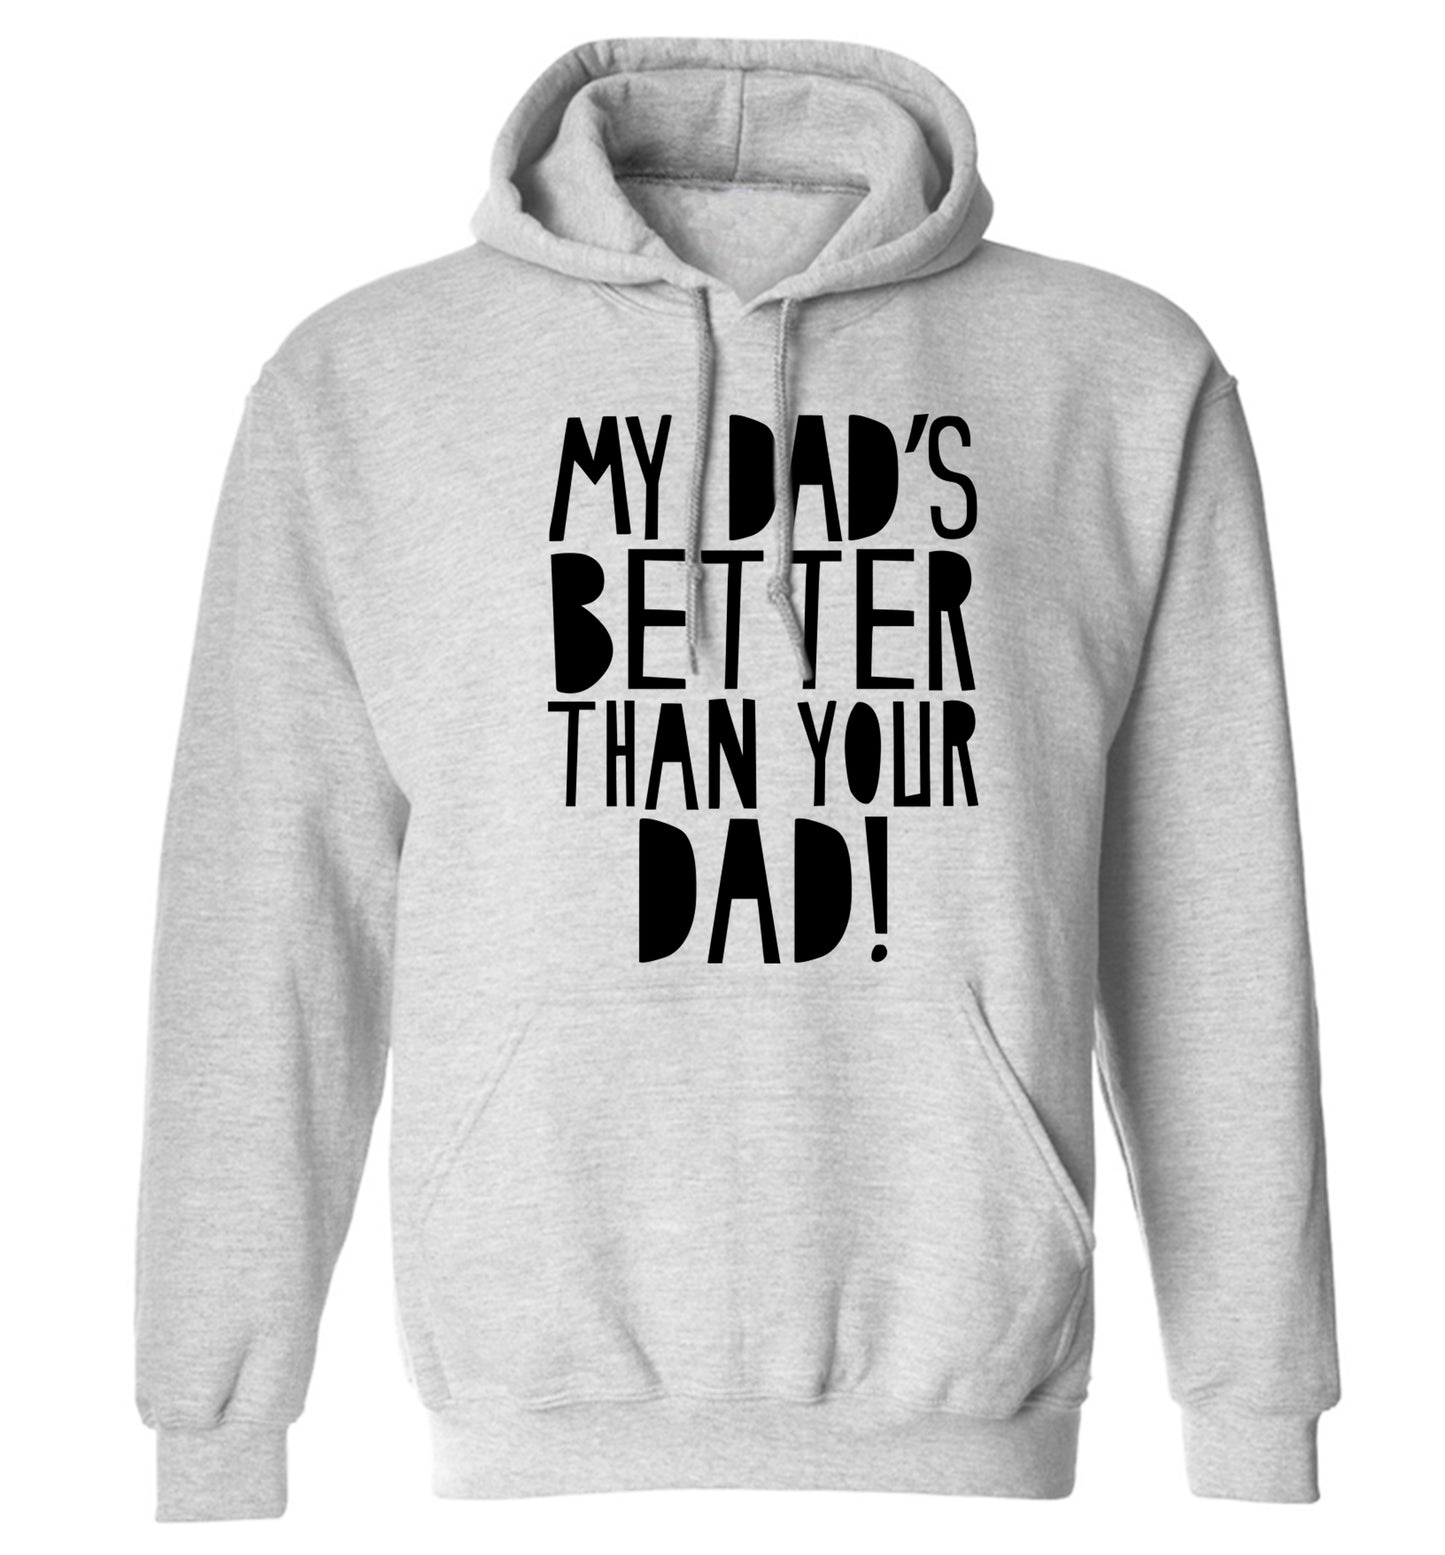 My dad's better than your dad adults unisex grey hoodie 2XL